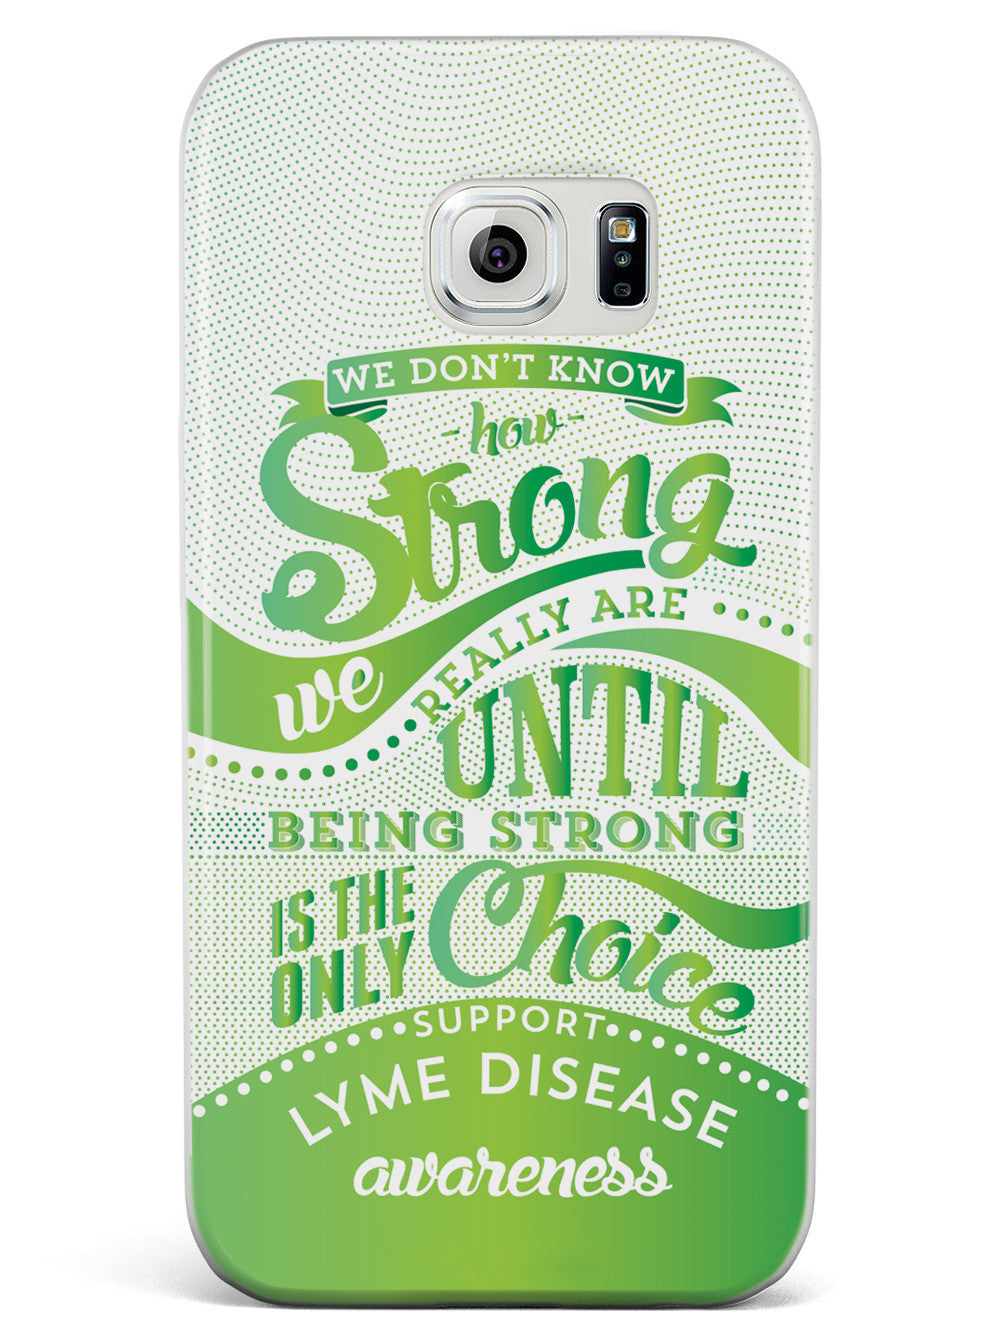 How Strong - Lyme Disease Awareness Case